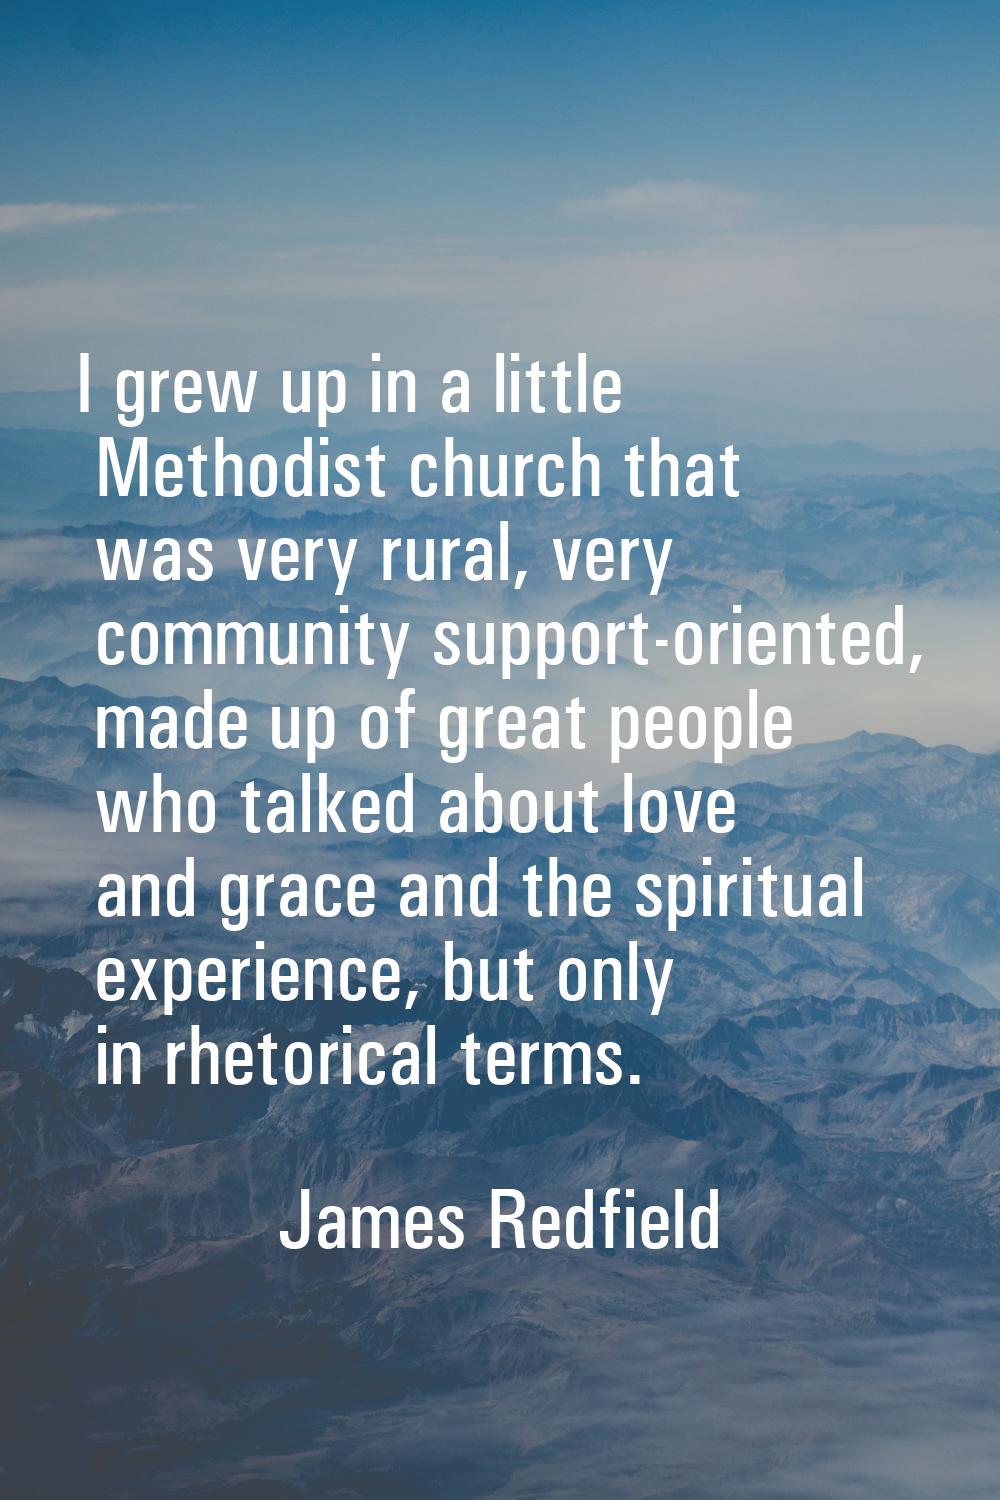 I grew up in a little Methodist church that was very rural, very community support-oriented, made u